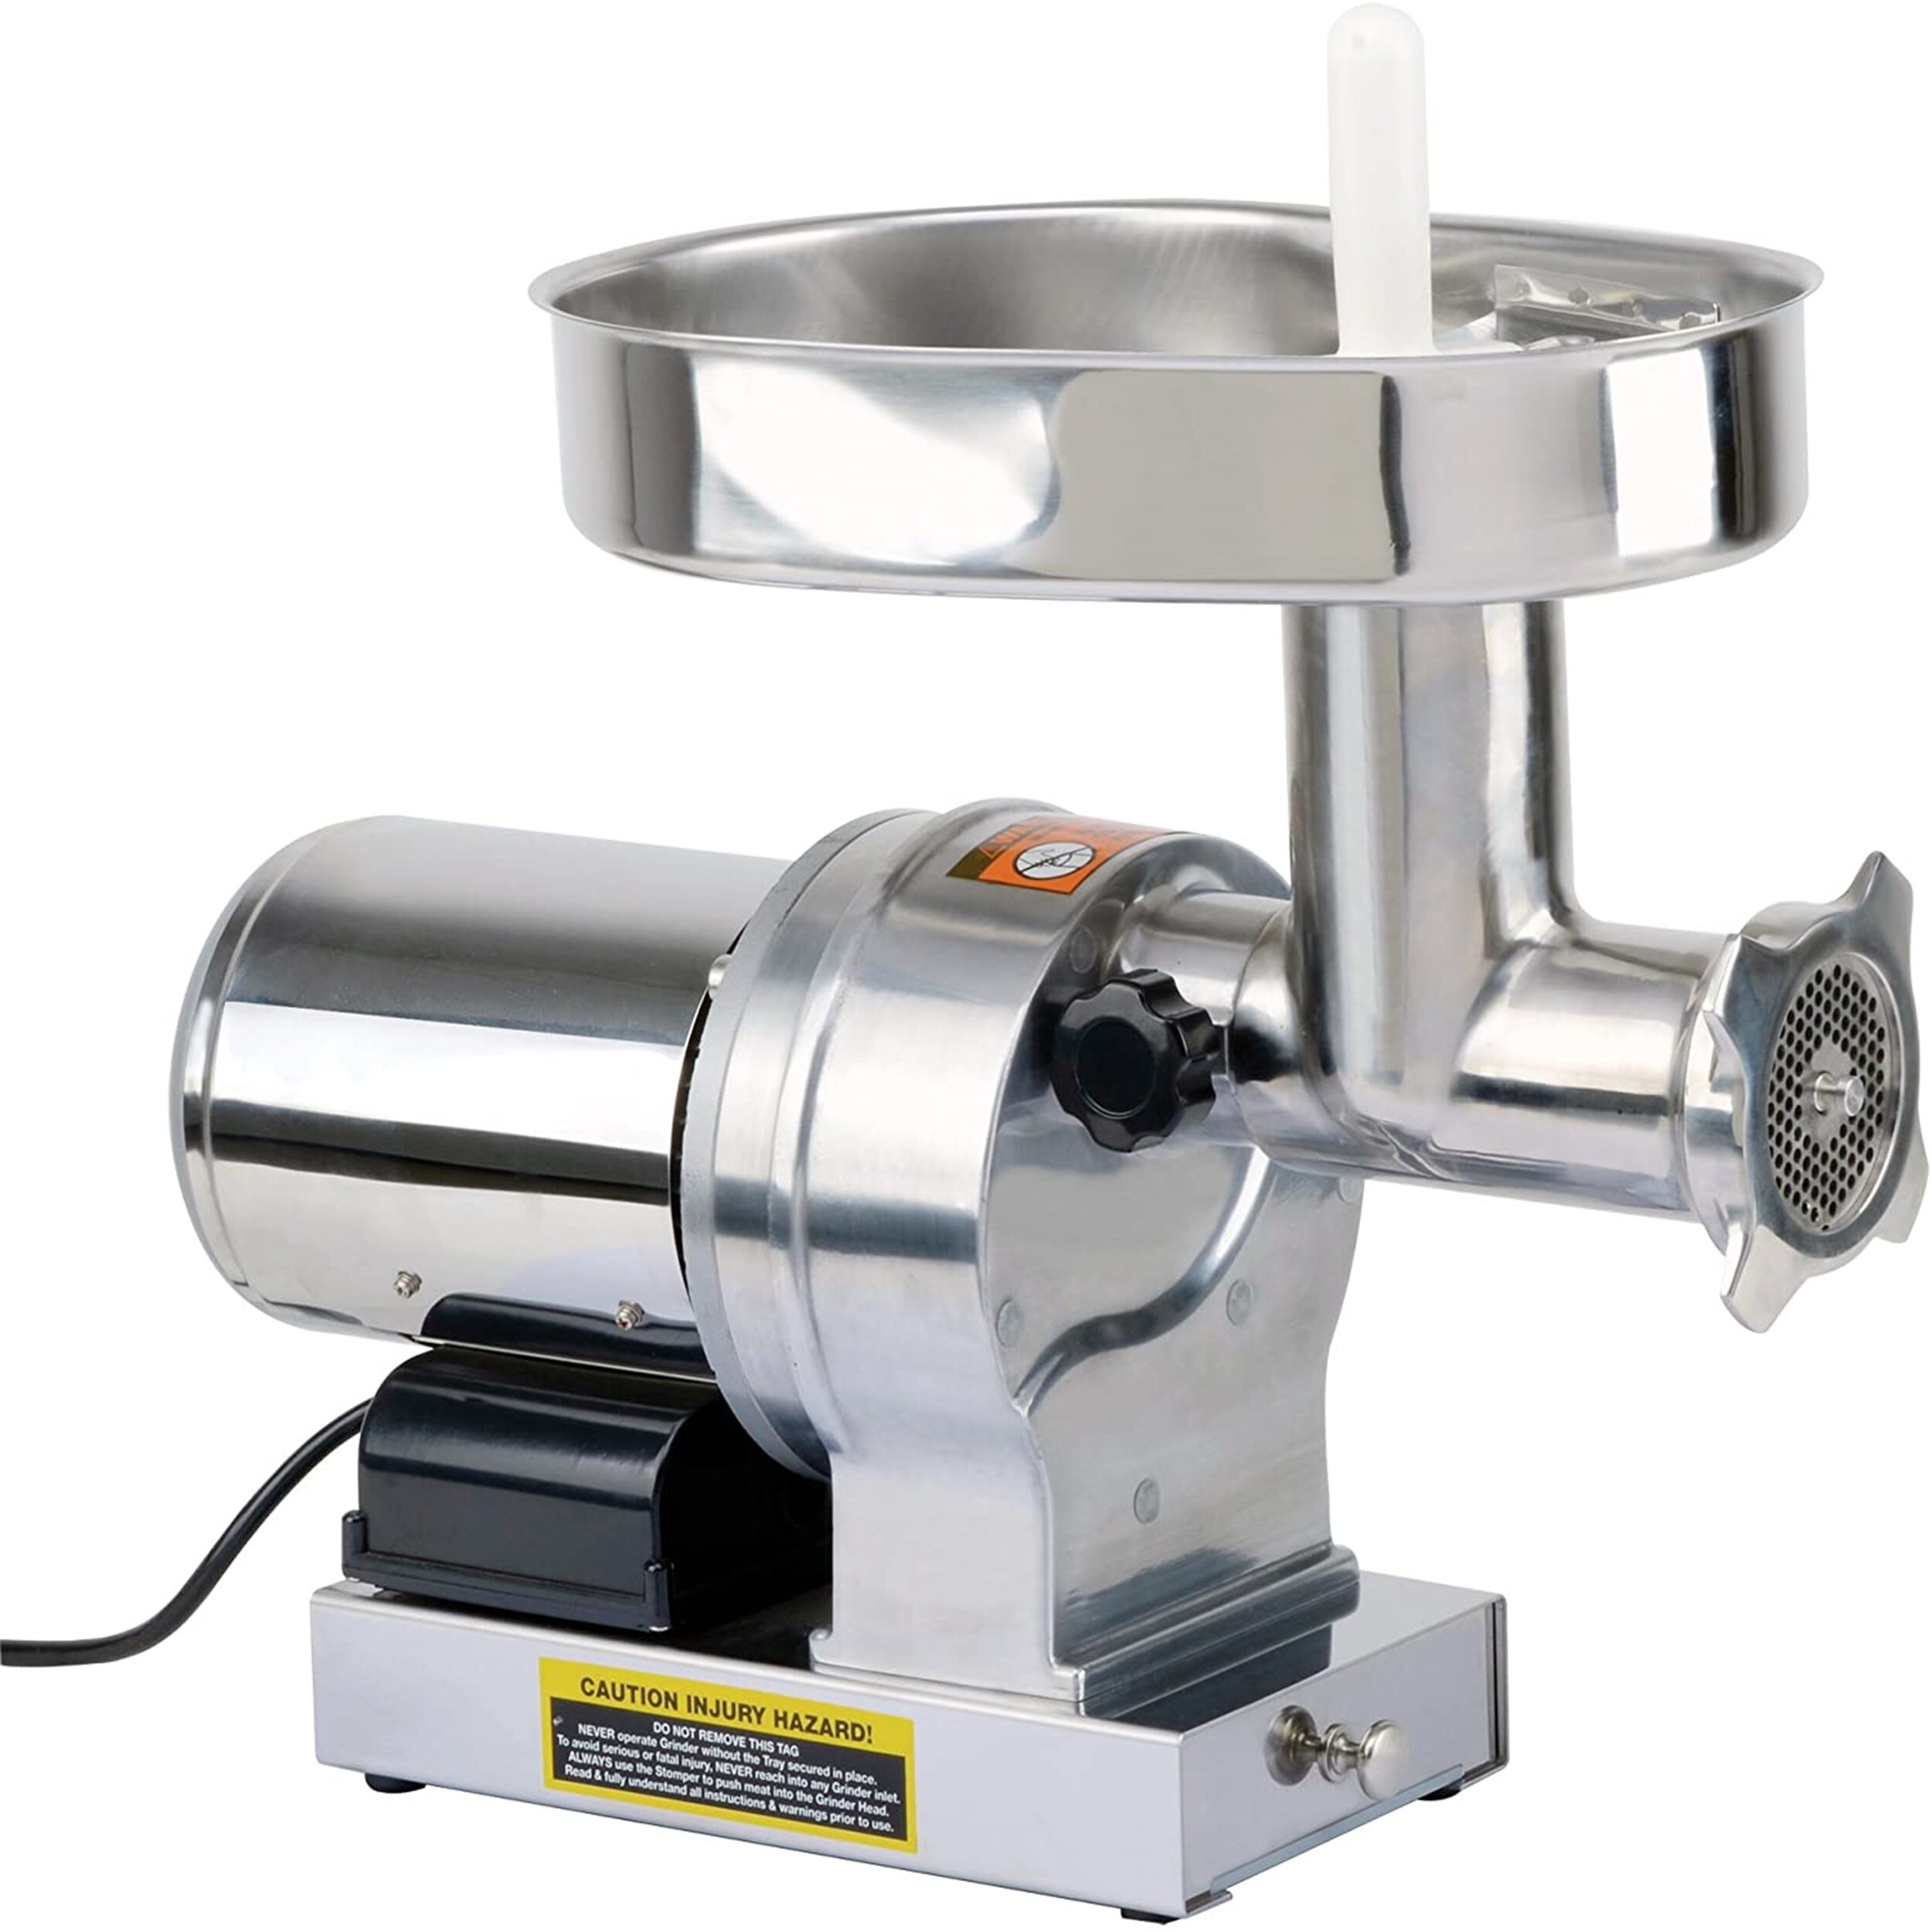 https://ak1.ostkcdn.com/images/products/is/images/direct/bf0e0fff3456c3610ce5e8c5aea0b22090f180cc/Electric-Meat-Grinder-%26-Sausage-Stuffer-%2332-1.5-HP-1080-LBS-Per-Hr-550-Watts-Elite-Super-Heavy-Duty-Stainless-Steel-Body.jpg